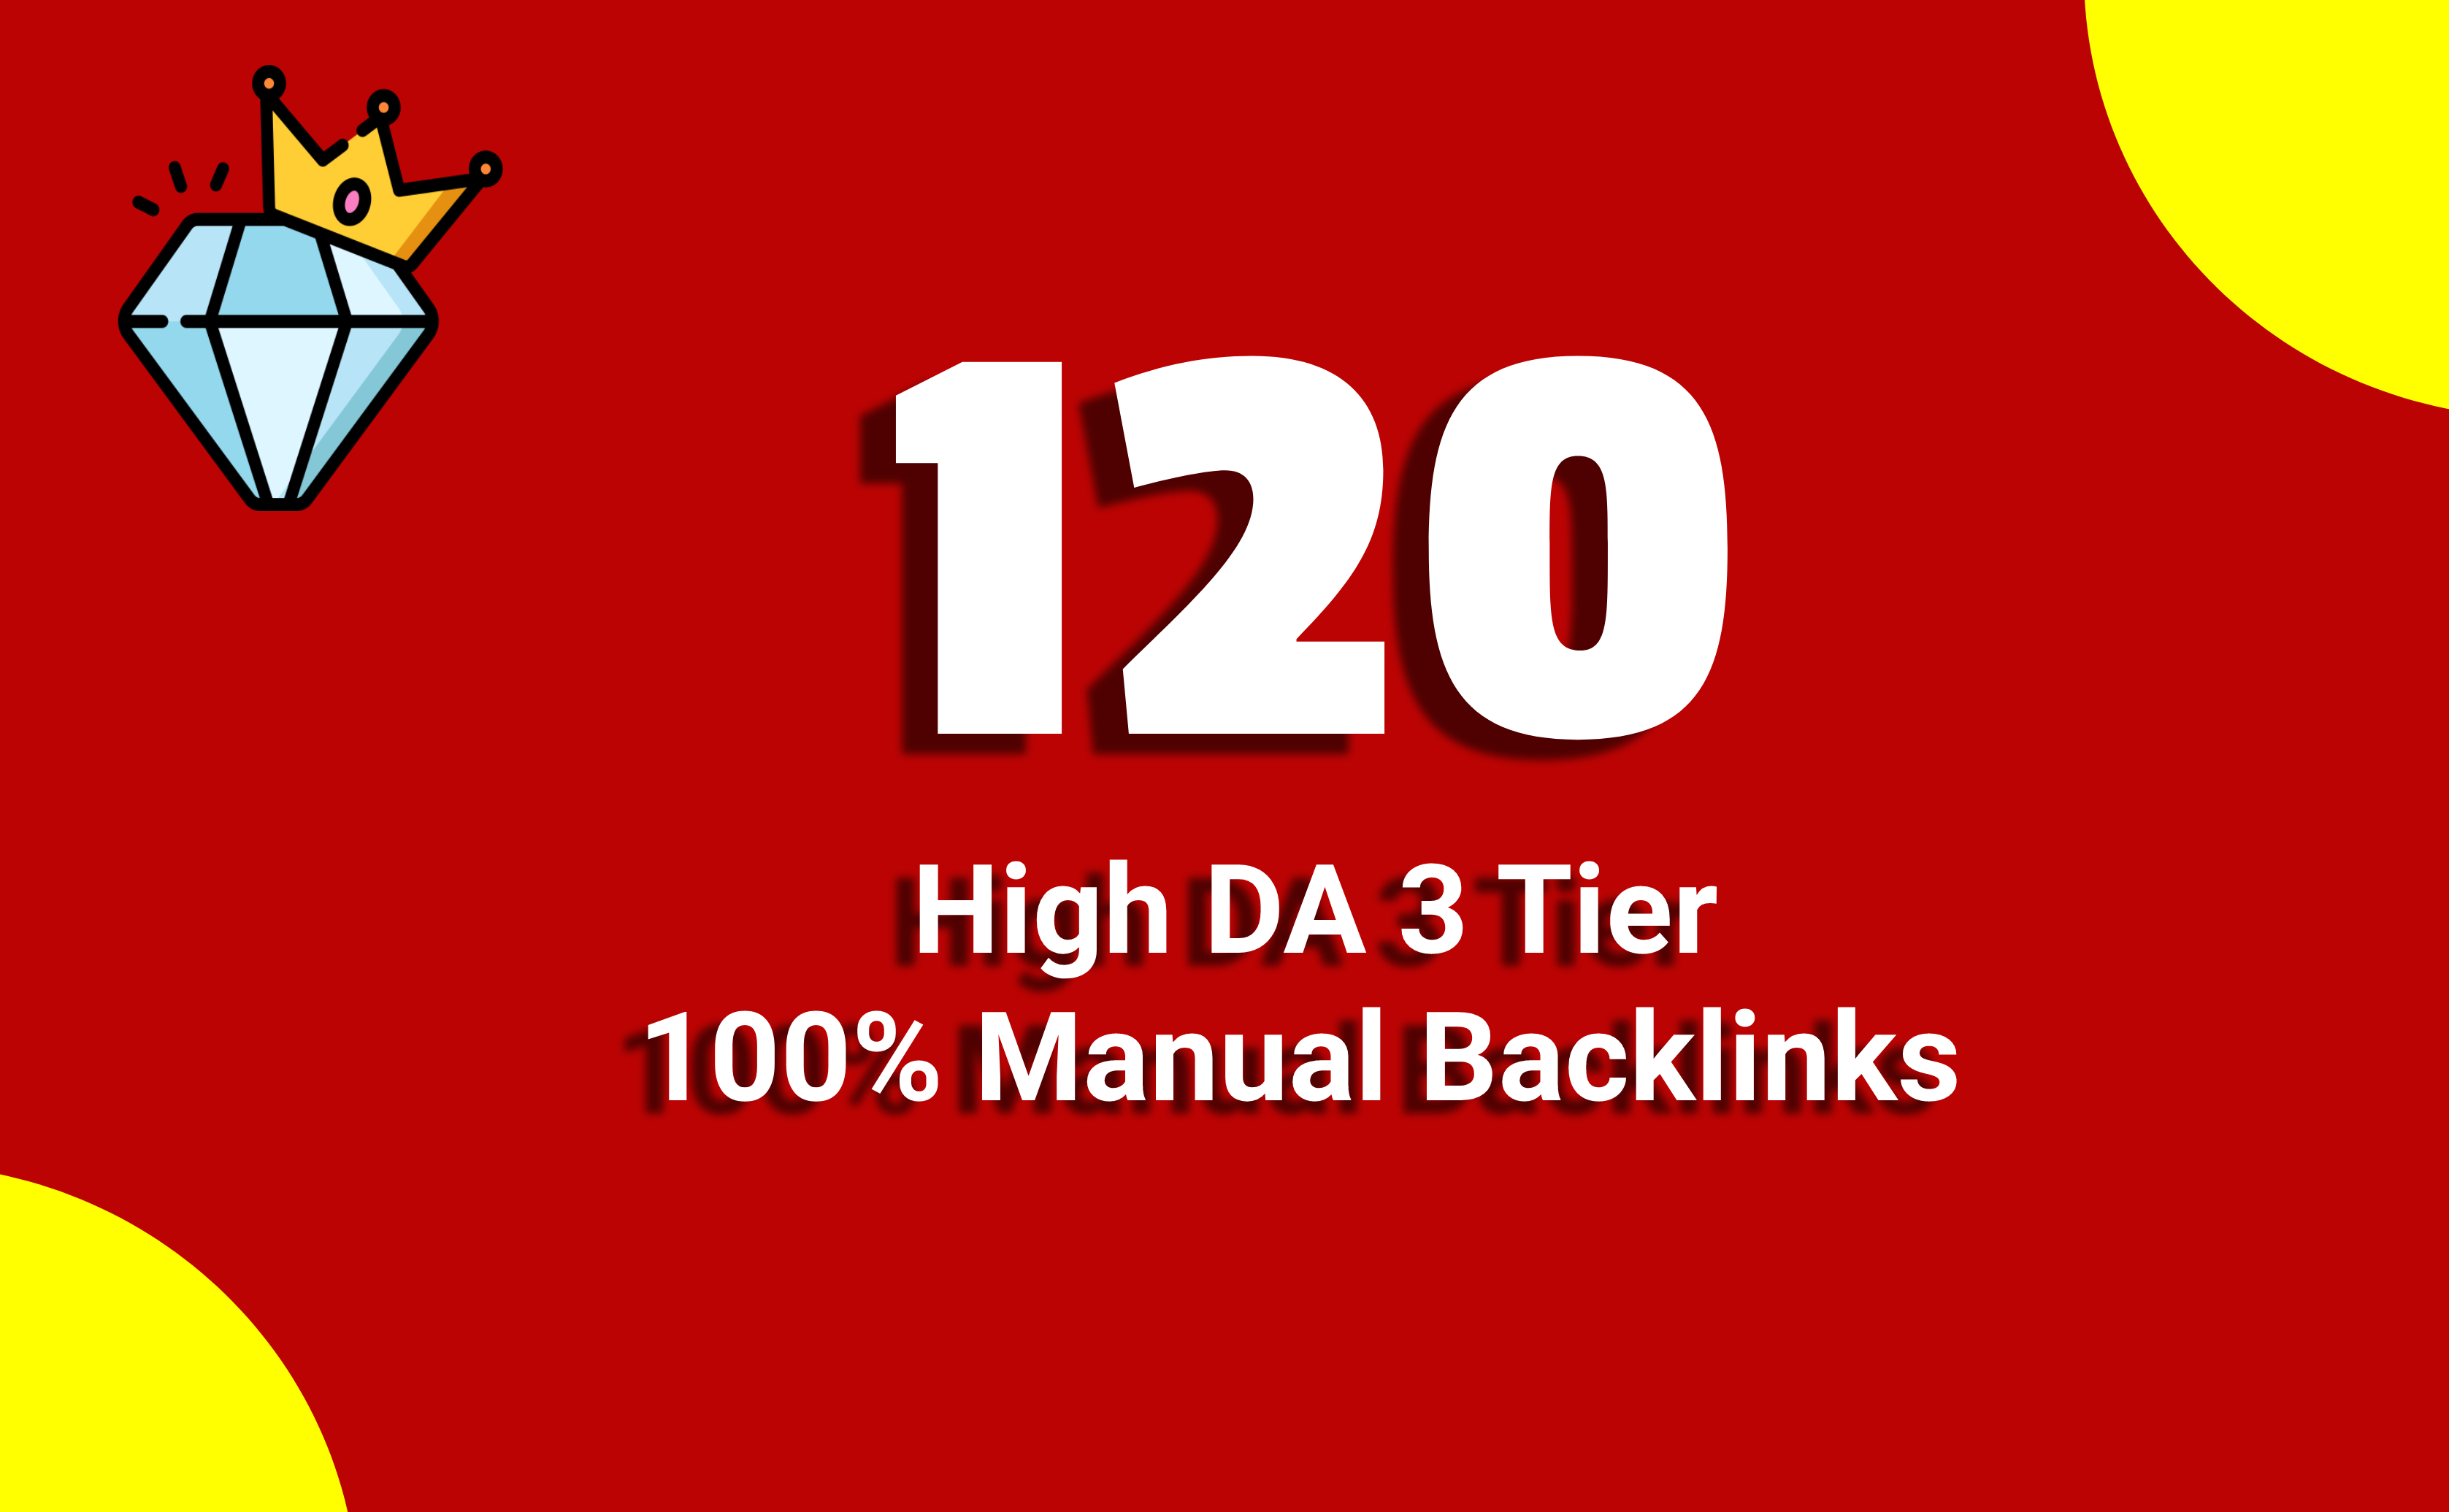 Boost Your Ranking With 120 High DA 3 Tier Backlinks | Diamond SEO Package